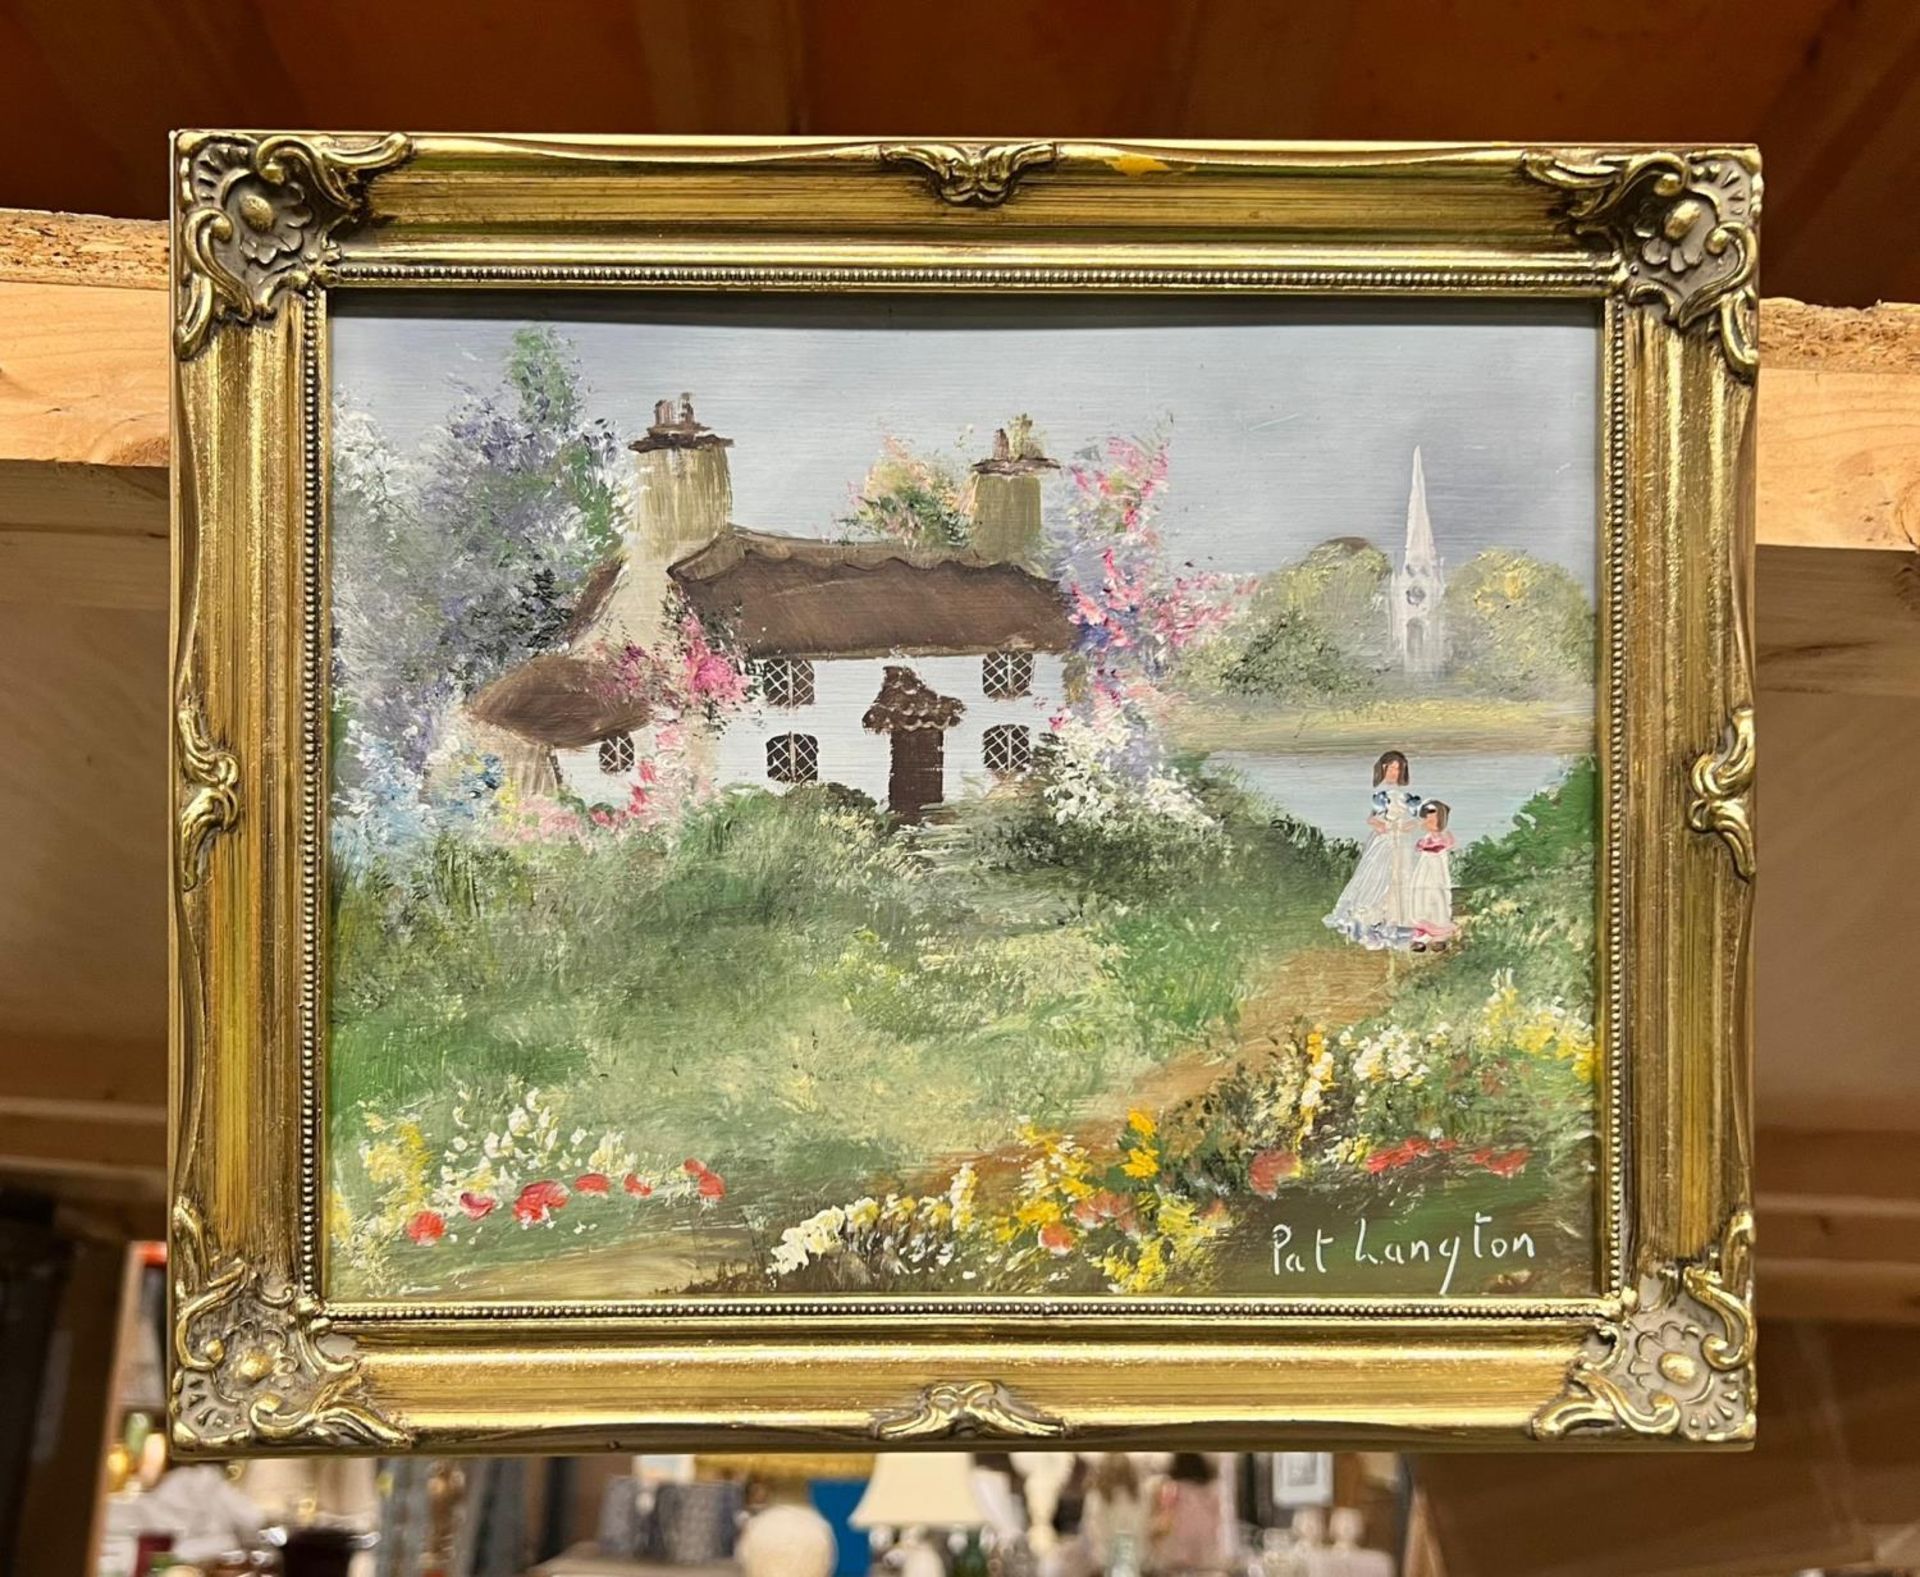 TWO PAT LANGTON SIGNED OILS ON BOARD OF COTTAGE SCENES, ONE WITH A BRIDE AND BRIDESMAID, THE OTHER A - Image 3 of 3